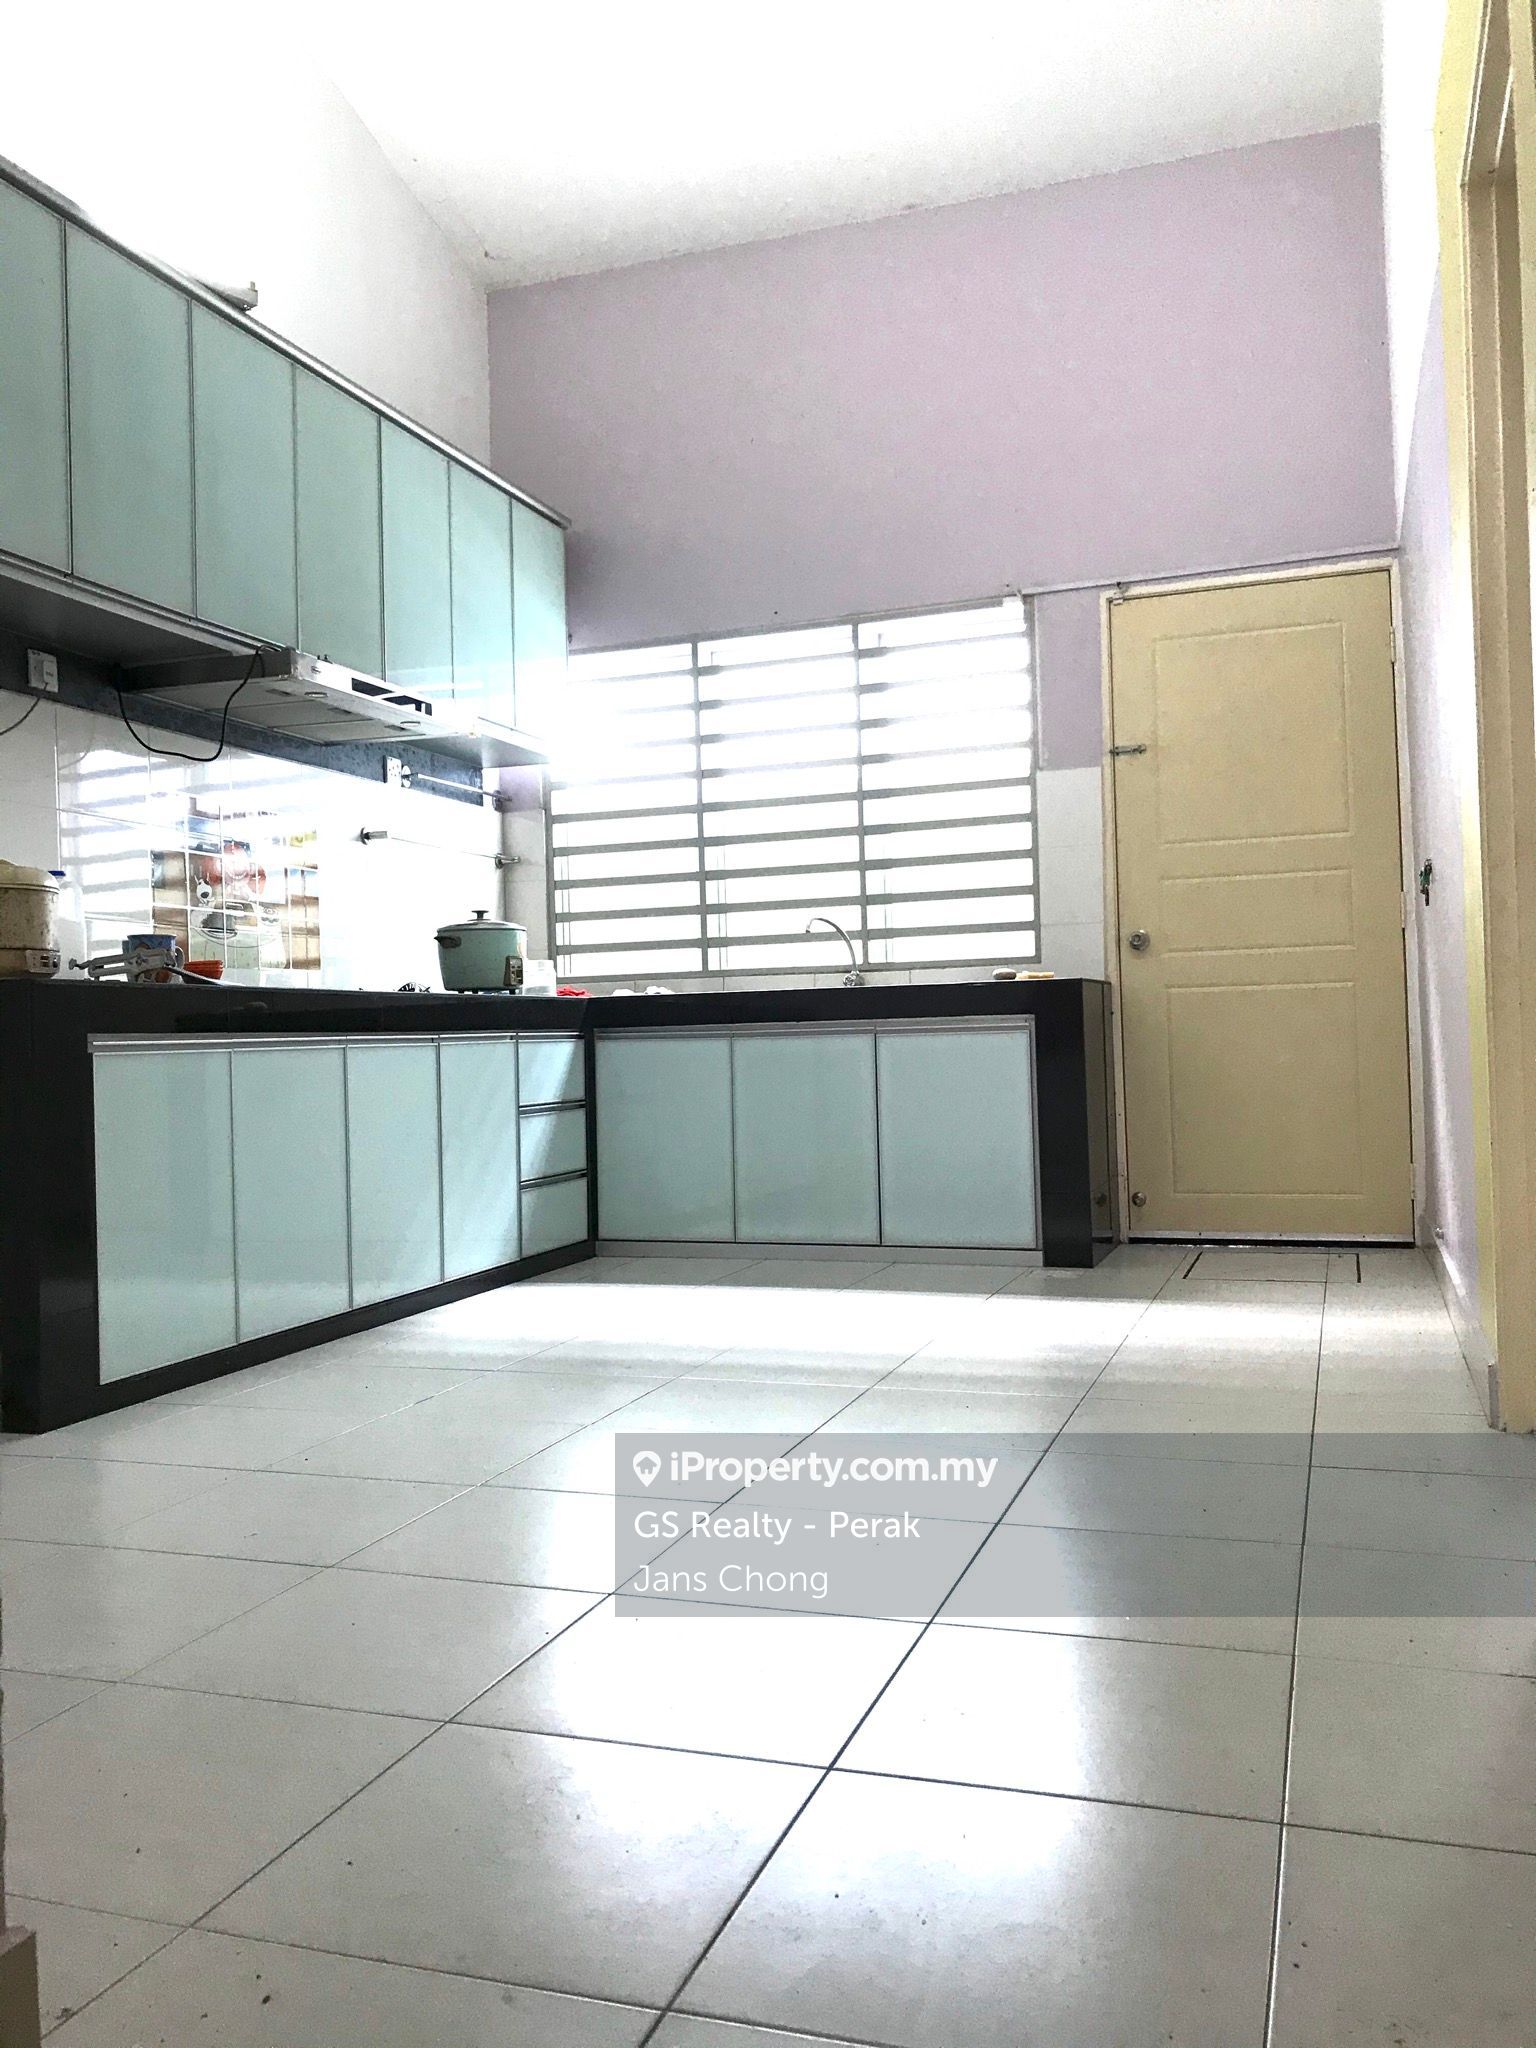 Shangrila Residence Sungai Siput Intermediate 1 Sty Terrace Link House 3 Bedrooms For Sale Iproperty Com My